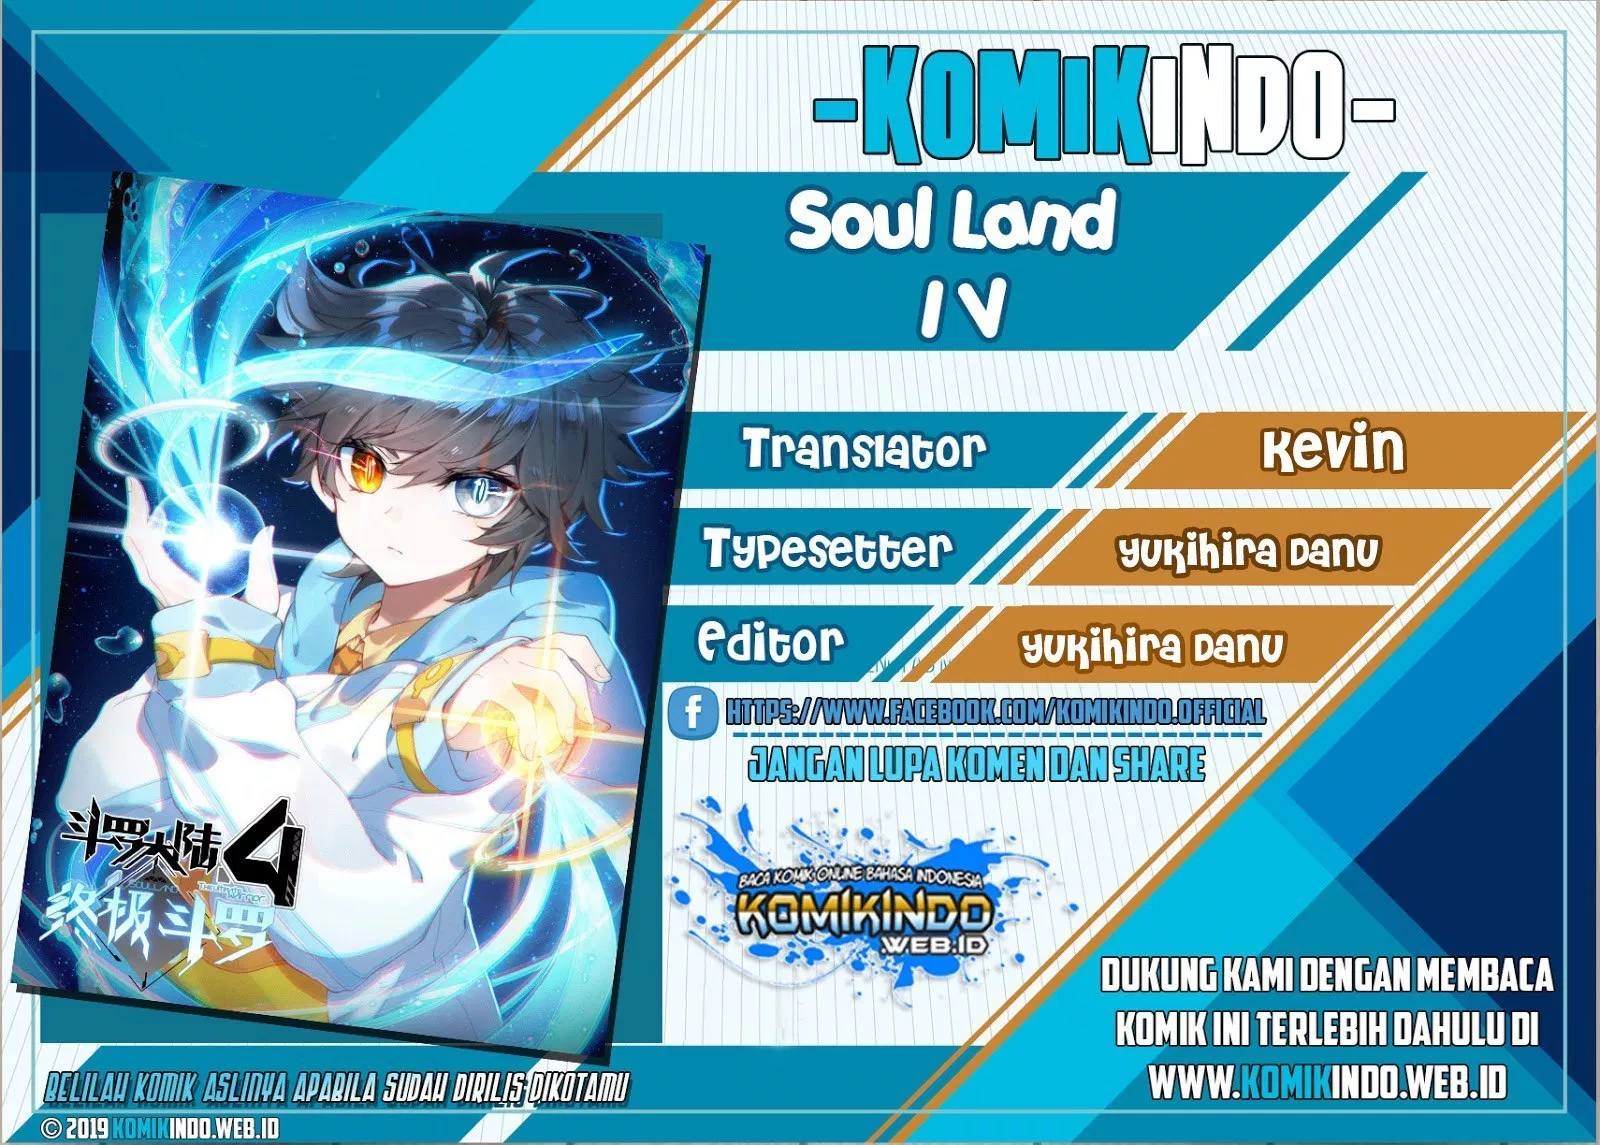 Soul Land IV – The Ultimate Combats Chapter 15